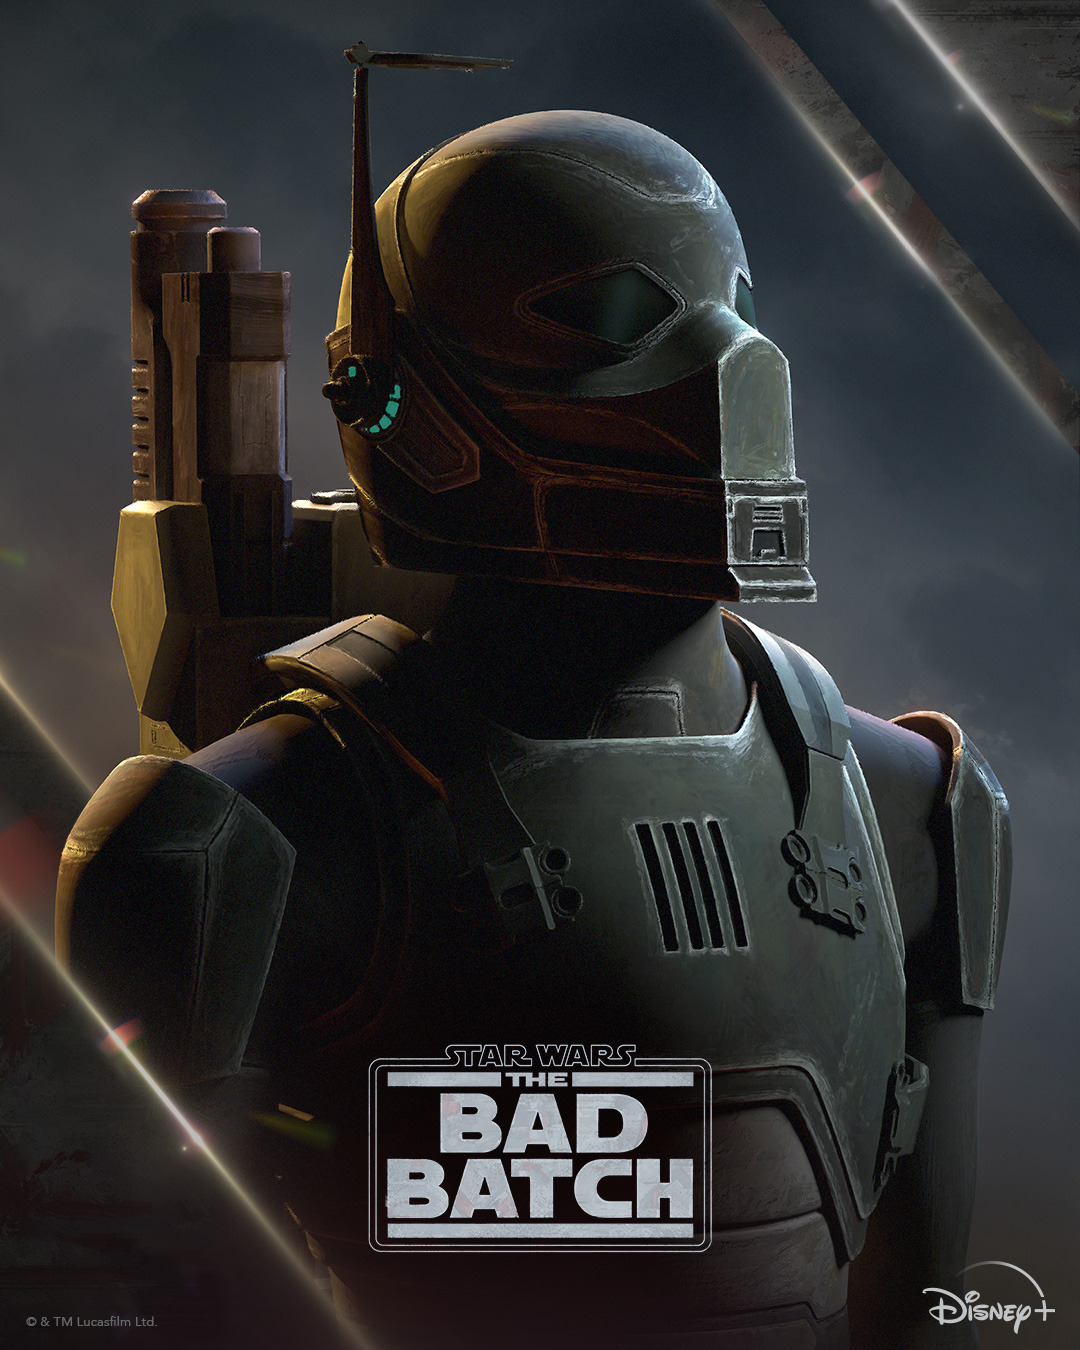 Extra Large TV Poster Image for Star Wars: The Bad Batch (#55 of 60)